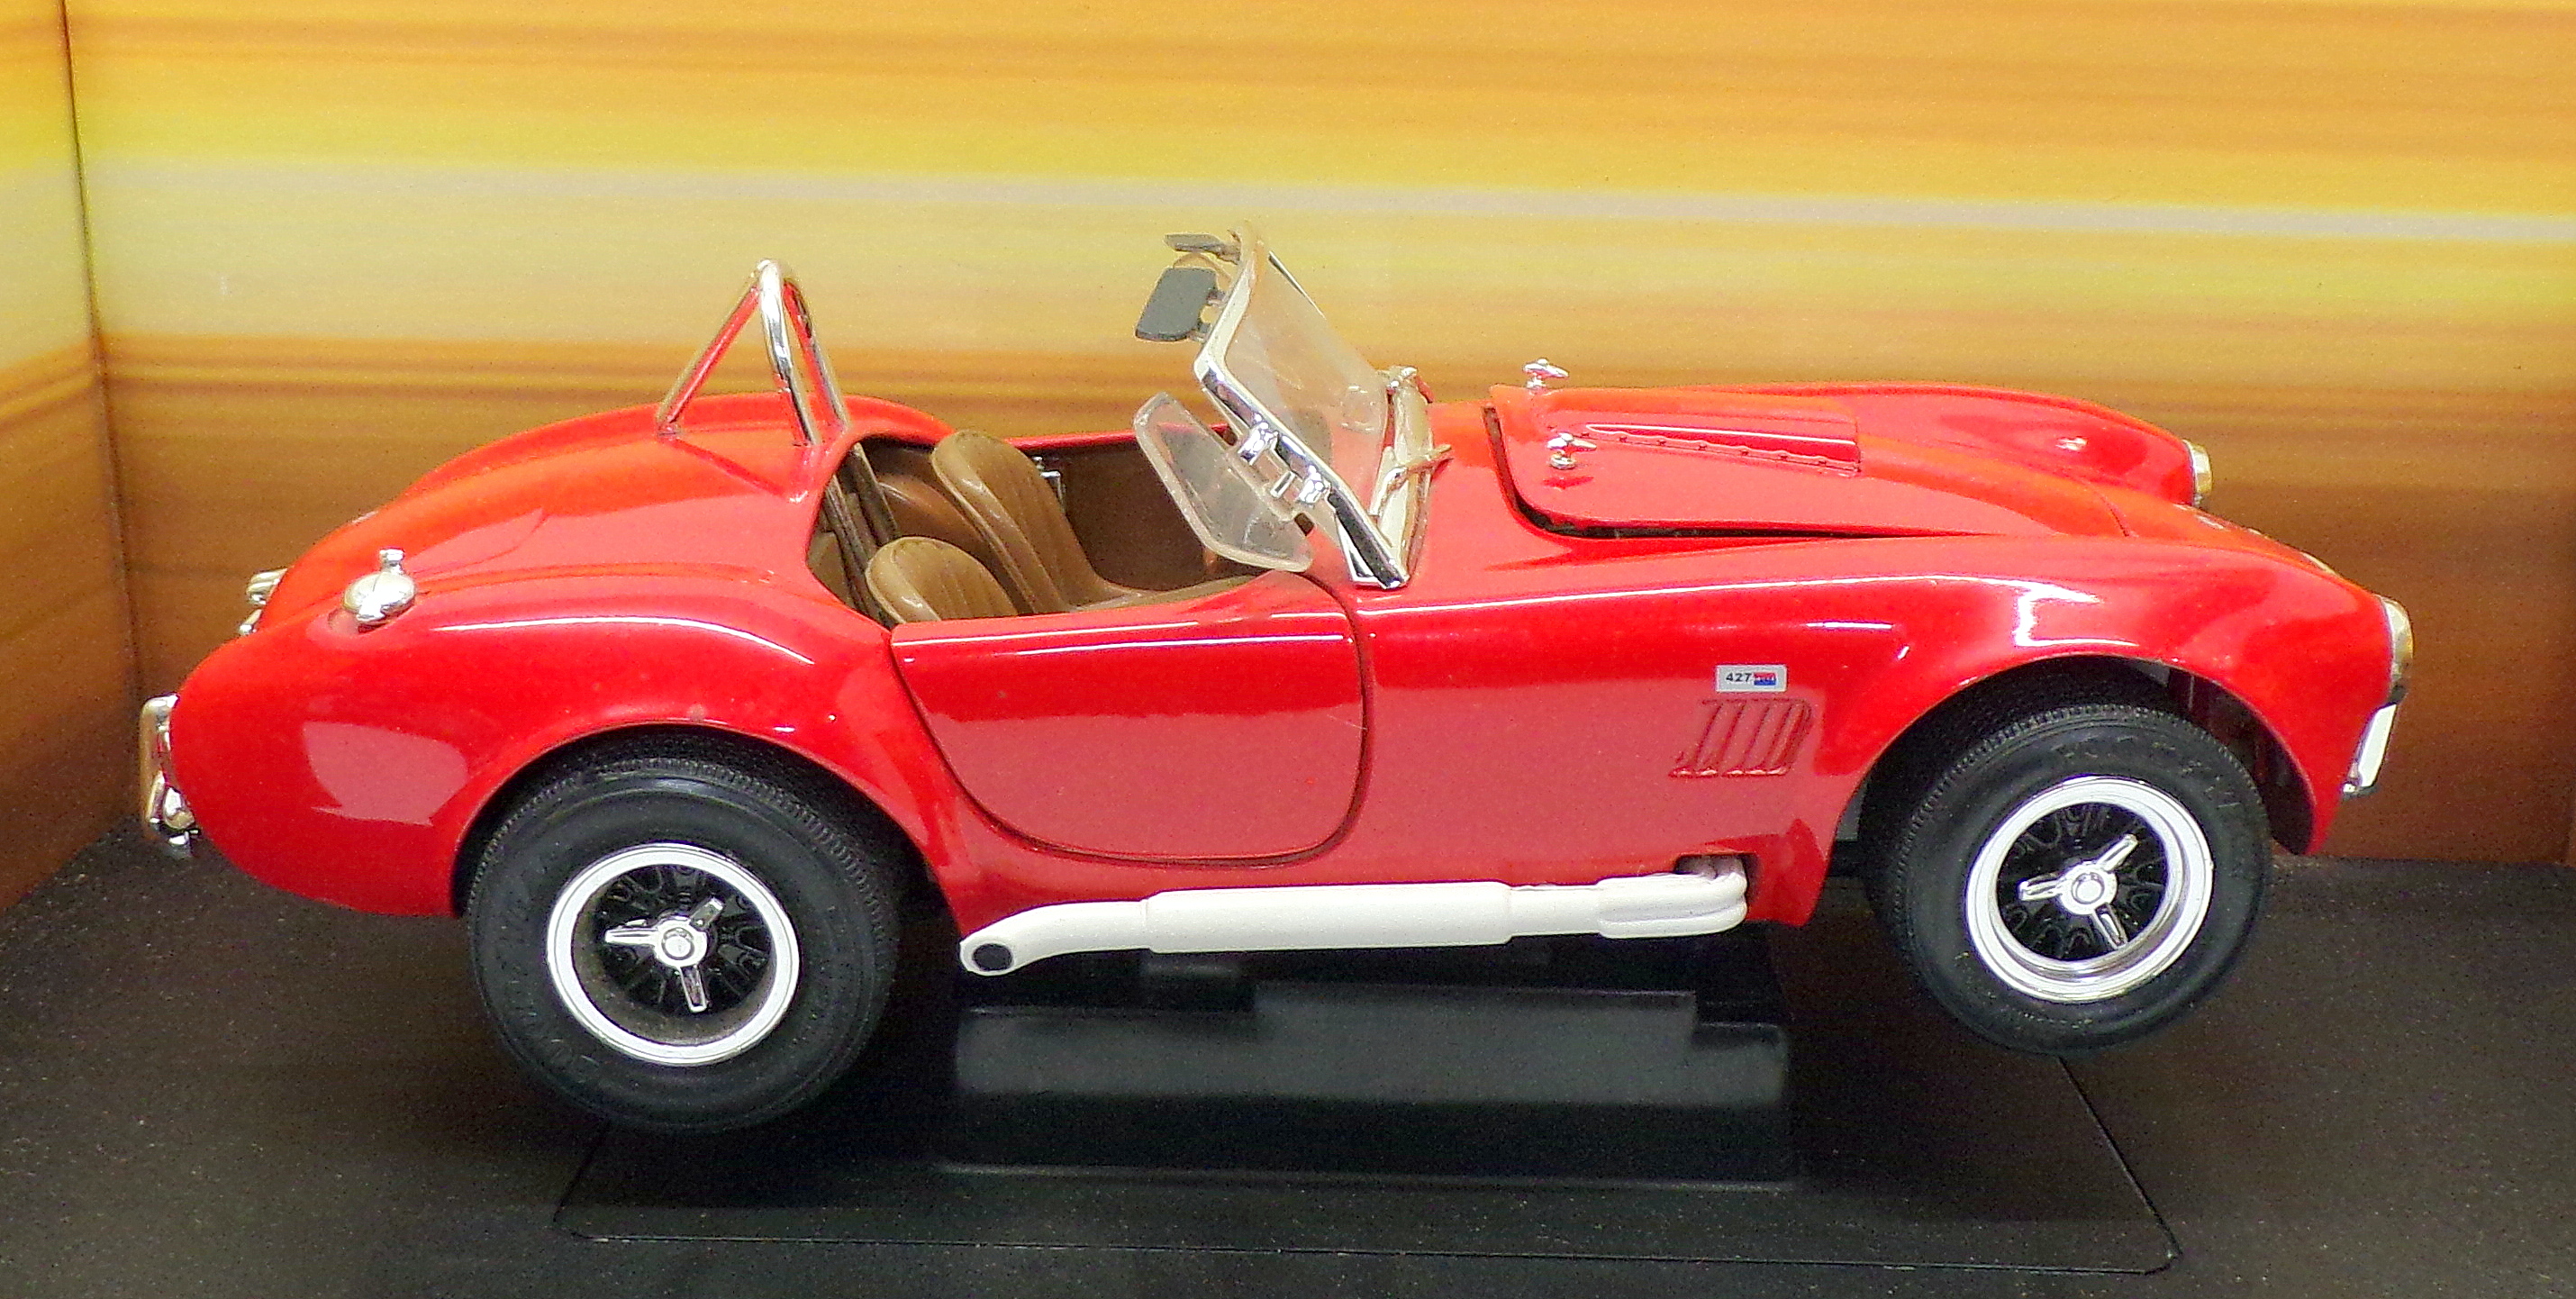 Ertl American Muscle 1/18 Scale 32760 - 1966 Shelby Cobra - Red